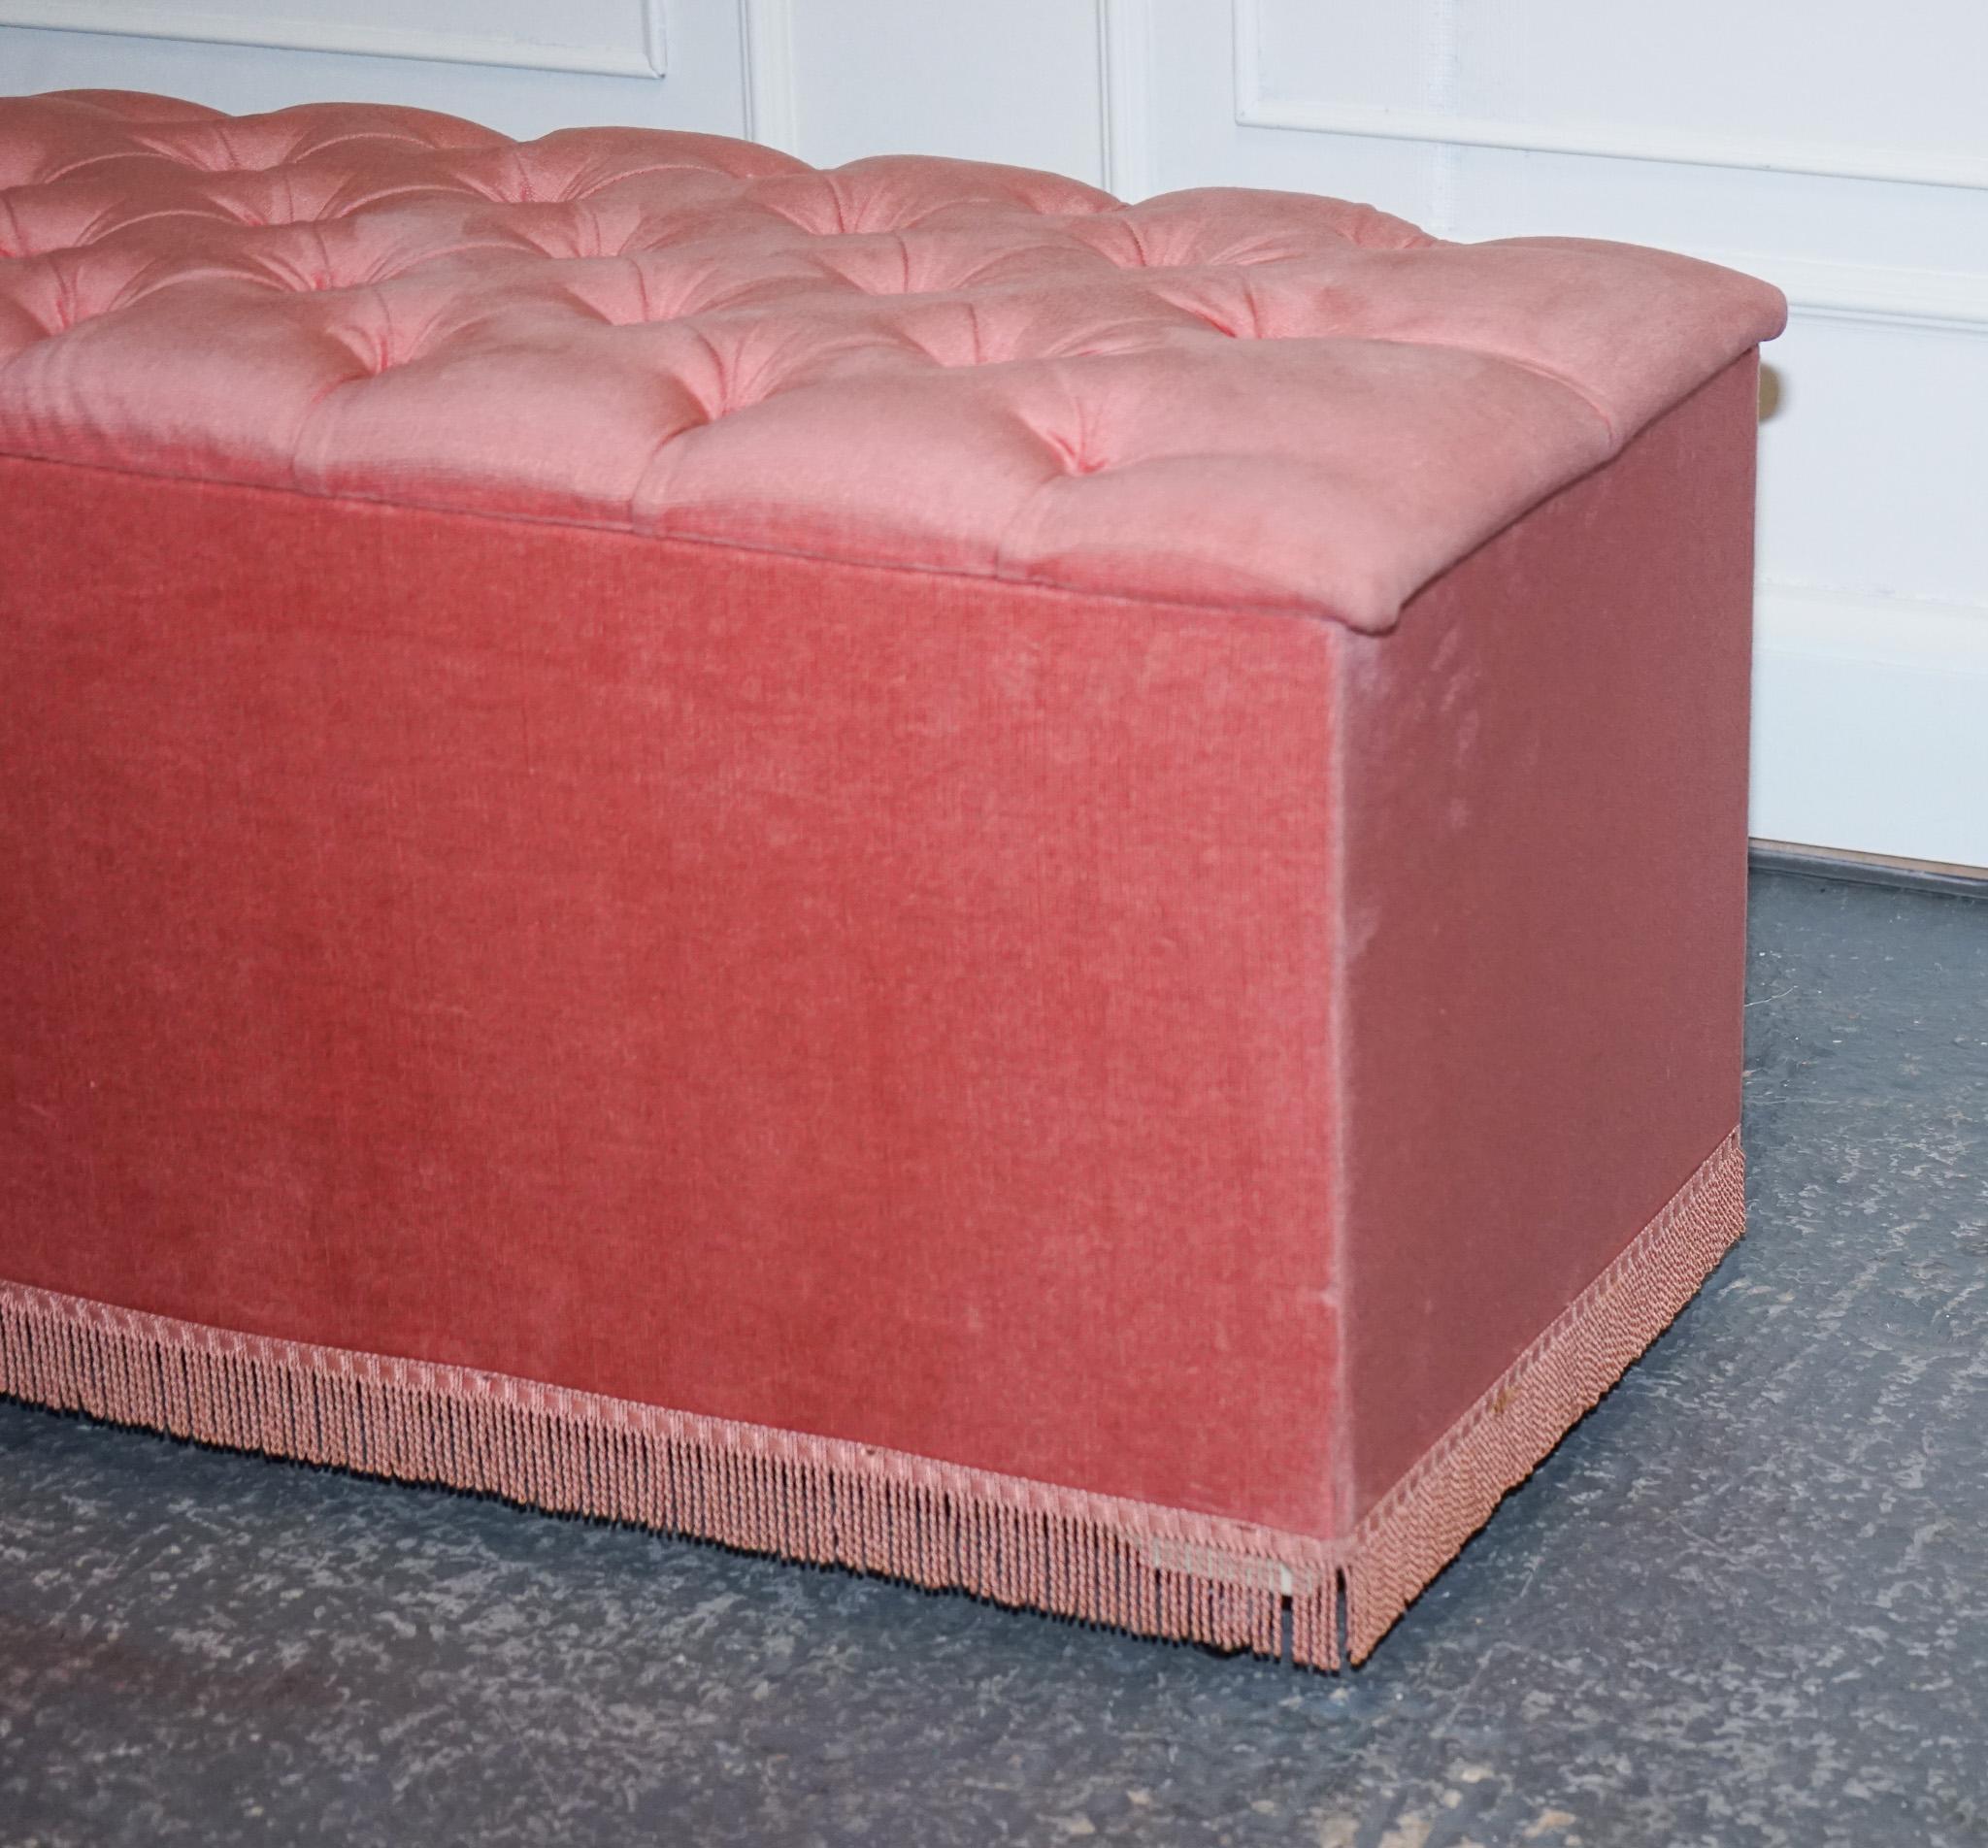 British Vintage 1960s Large Tuffed Ottoman Bed End Storage Chest Box Trunk Fringed For Sale